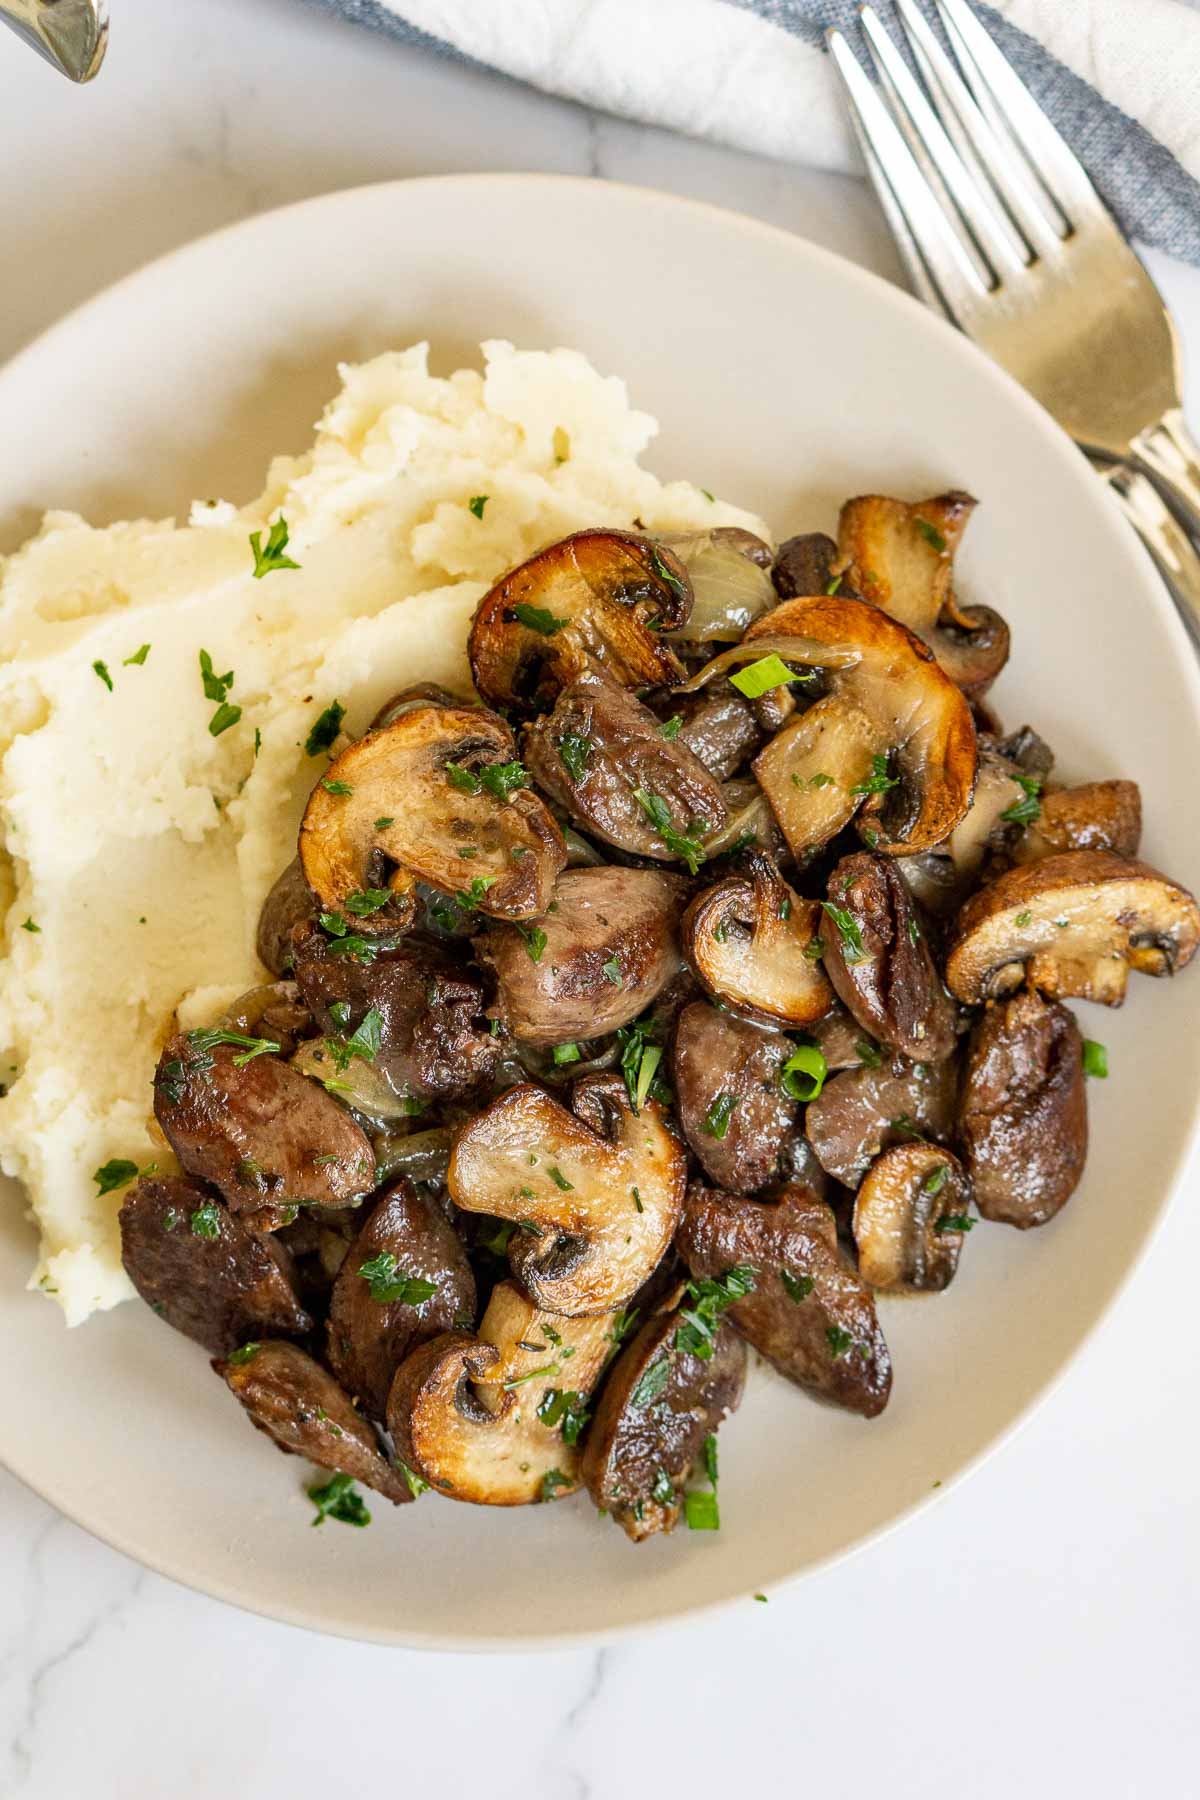 Chicken hearts with sauteed mushrooms and mashed potatoes on a plate.